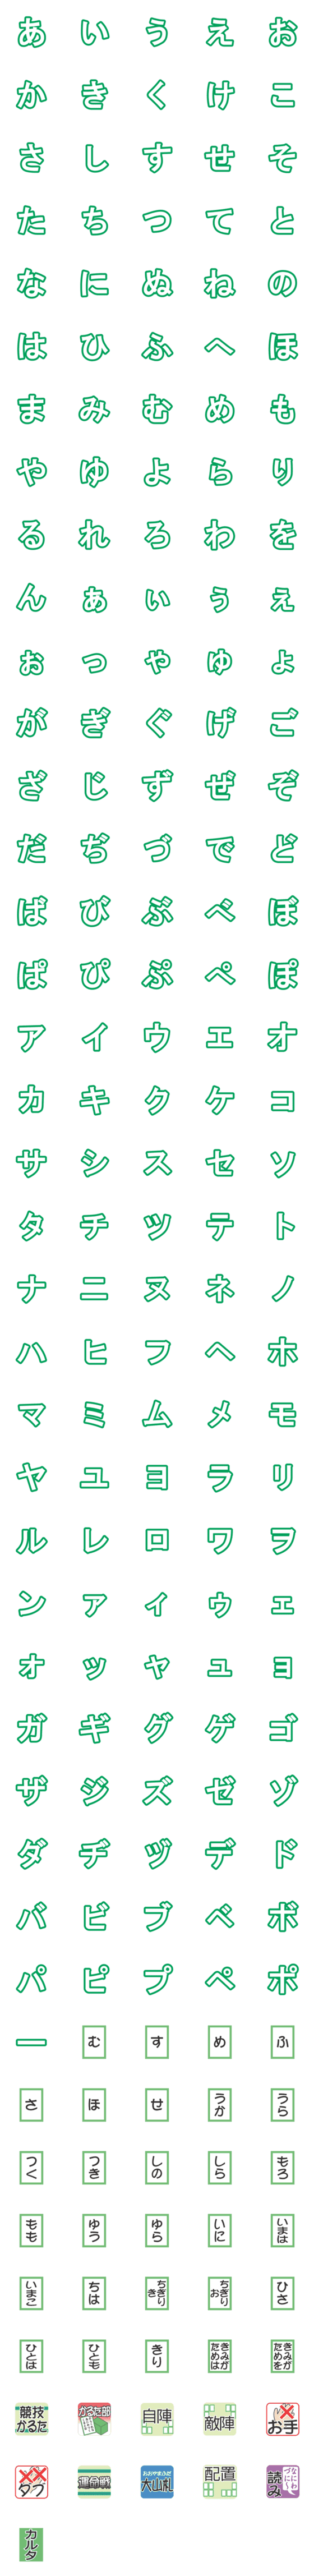 [LINE絵文字]競技かるた絵文字②の画像一覧